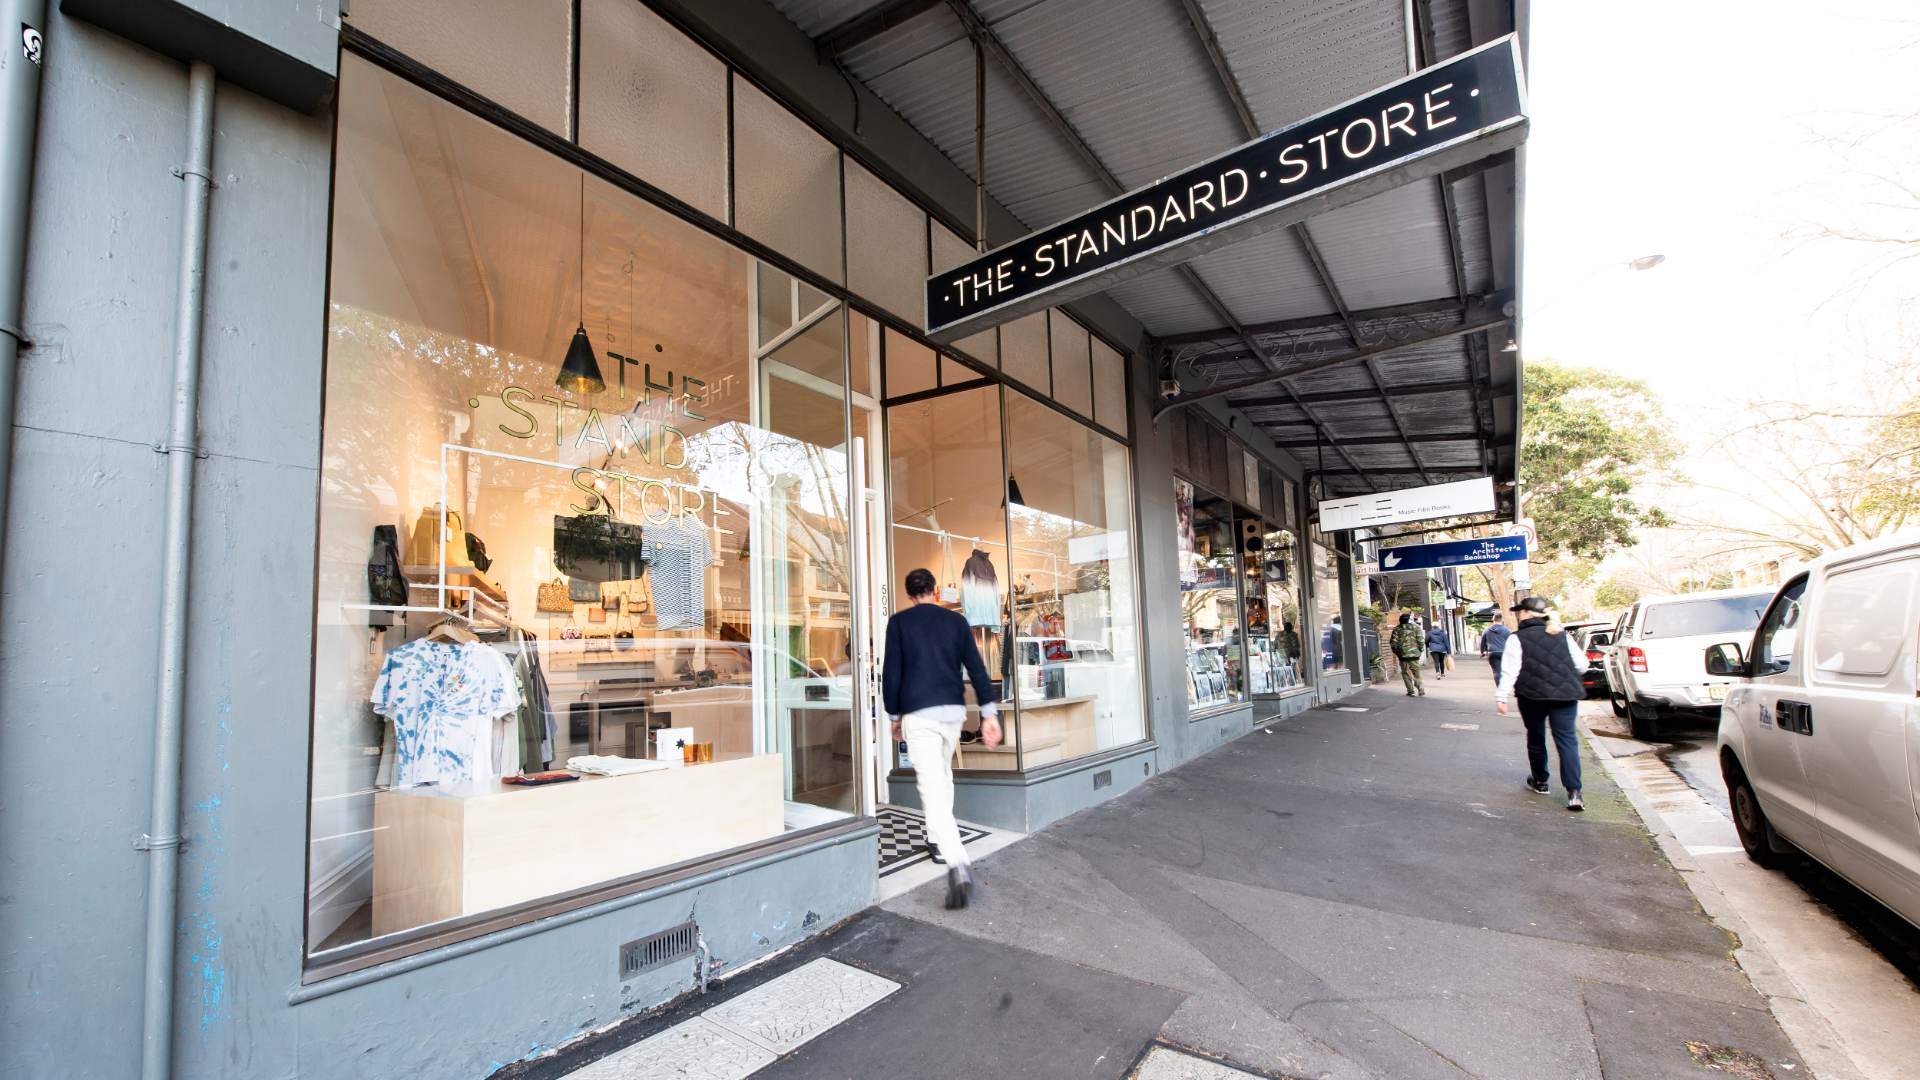 Exterior of The Standard Store in Surry Hills